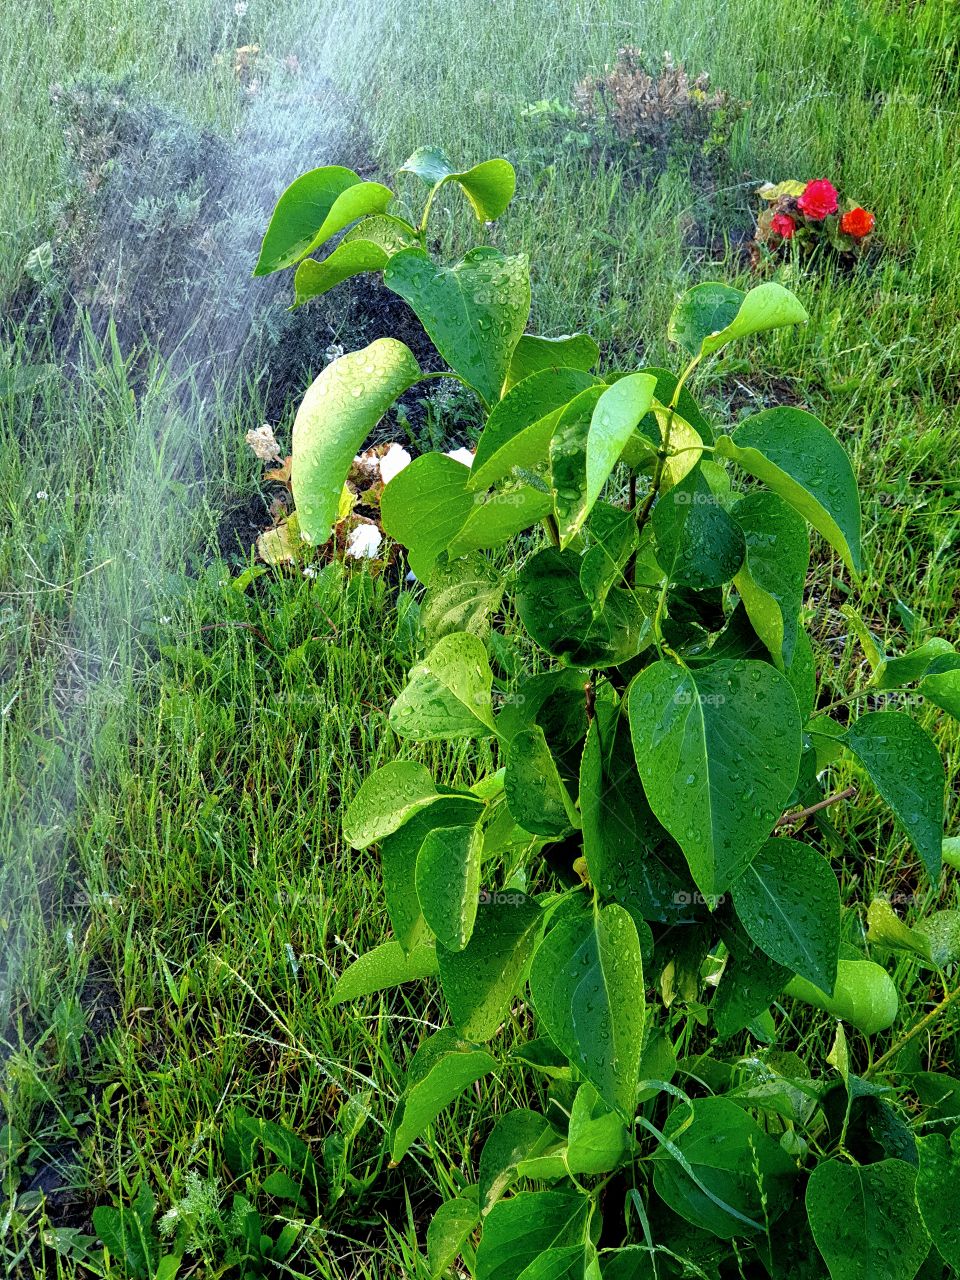 watering grass, bushes and flowers